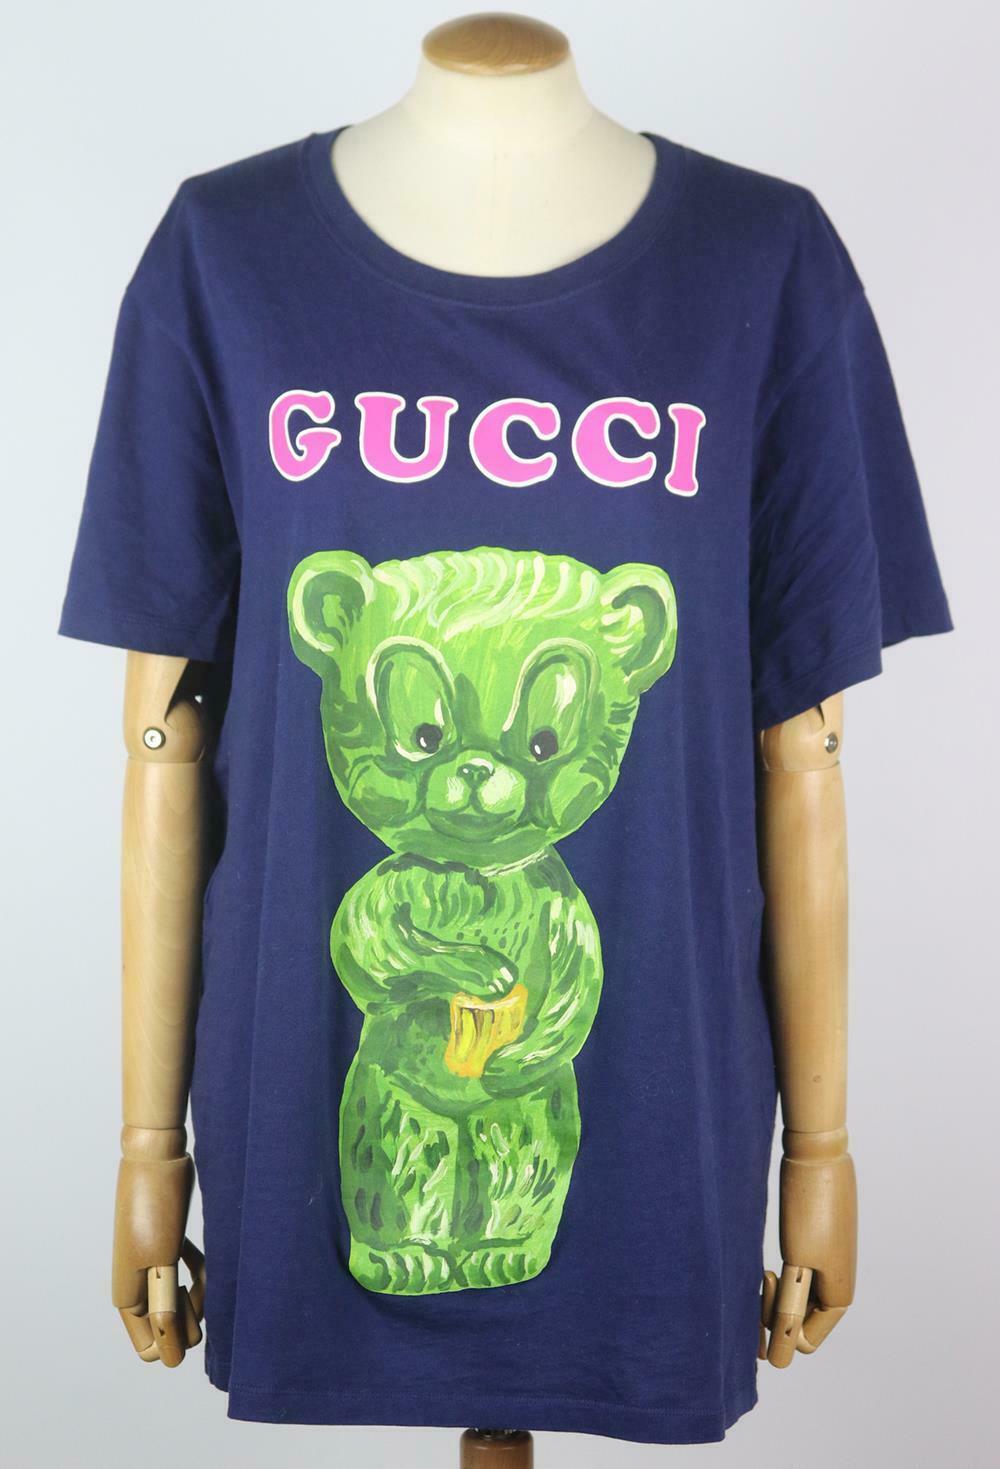 This Gucci 'Gummy Bear' cotton-jersey style is printed with a large gummy bear and the brand's name printed in bold lettering on the front – a reoccurring motifs throughout the collection.
Navy cotton-jersey.
Slips on.
100% Cotton.

Size: Medium (UK